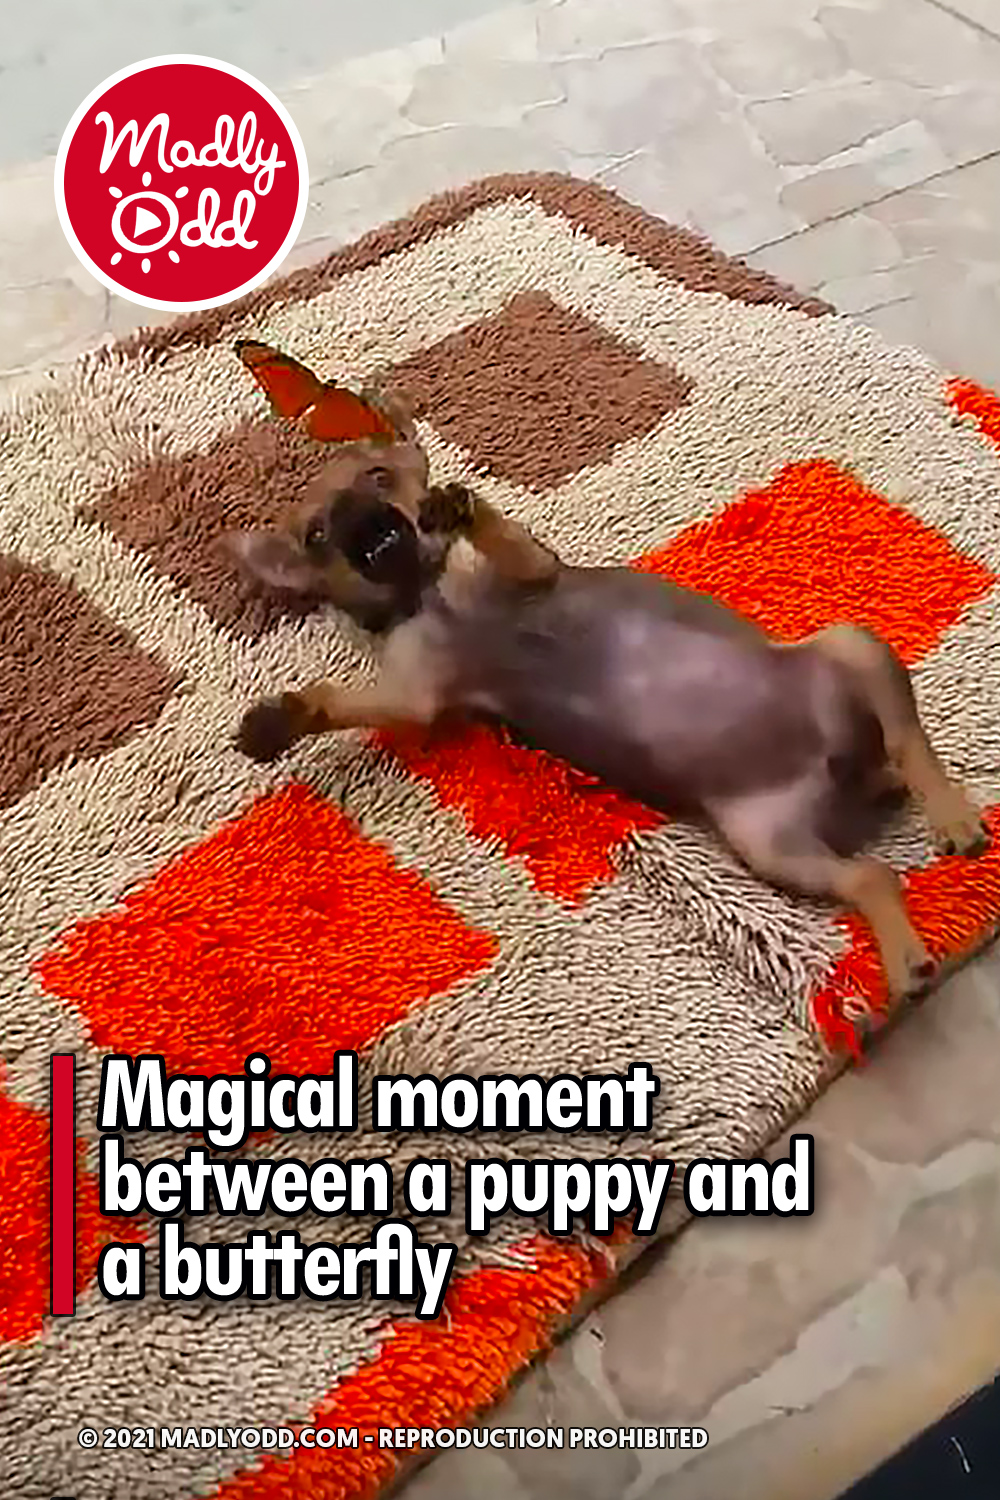 Magical moment between a puppy and a butterfly